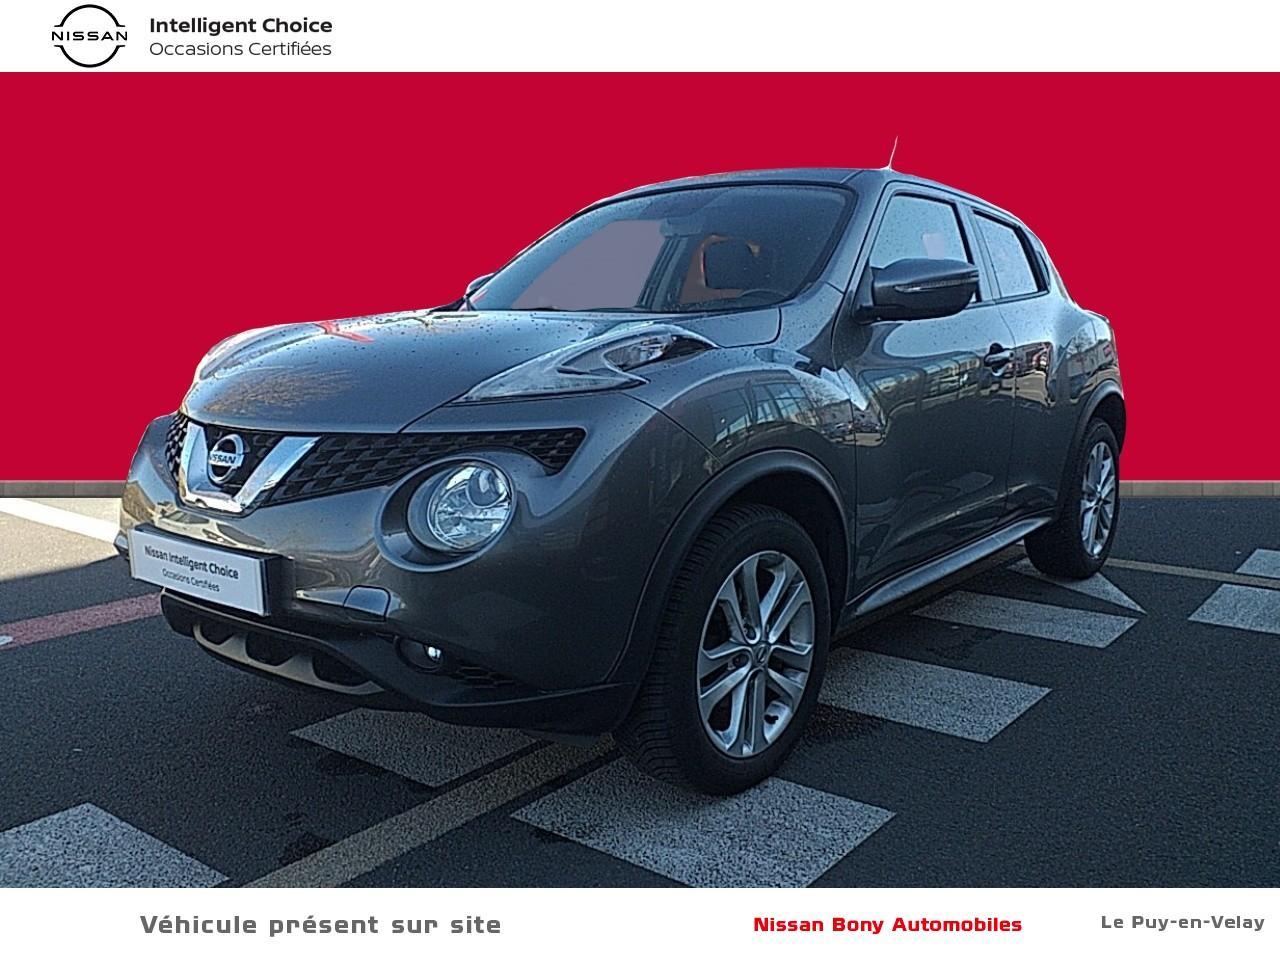 Nissan Juke 1.2E DIG-T 115 START/STOP SYSTEM CONNECT EDITION